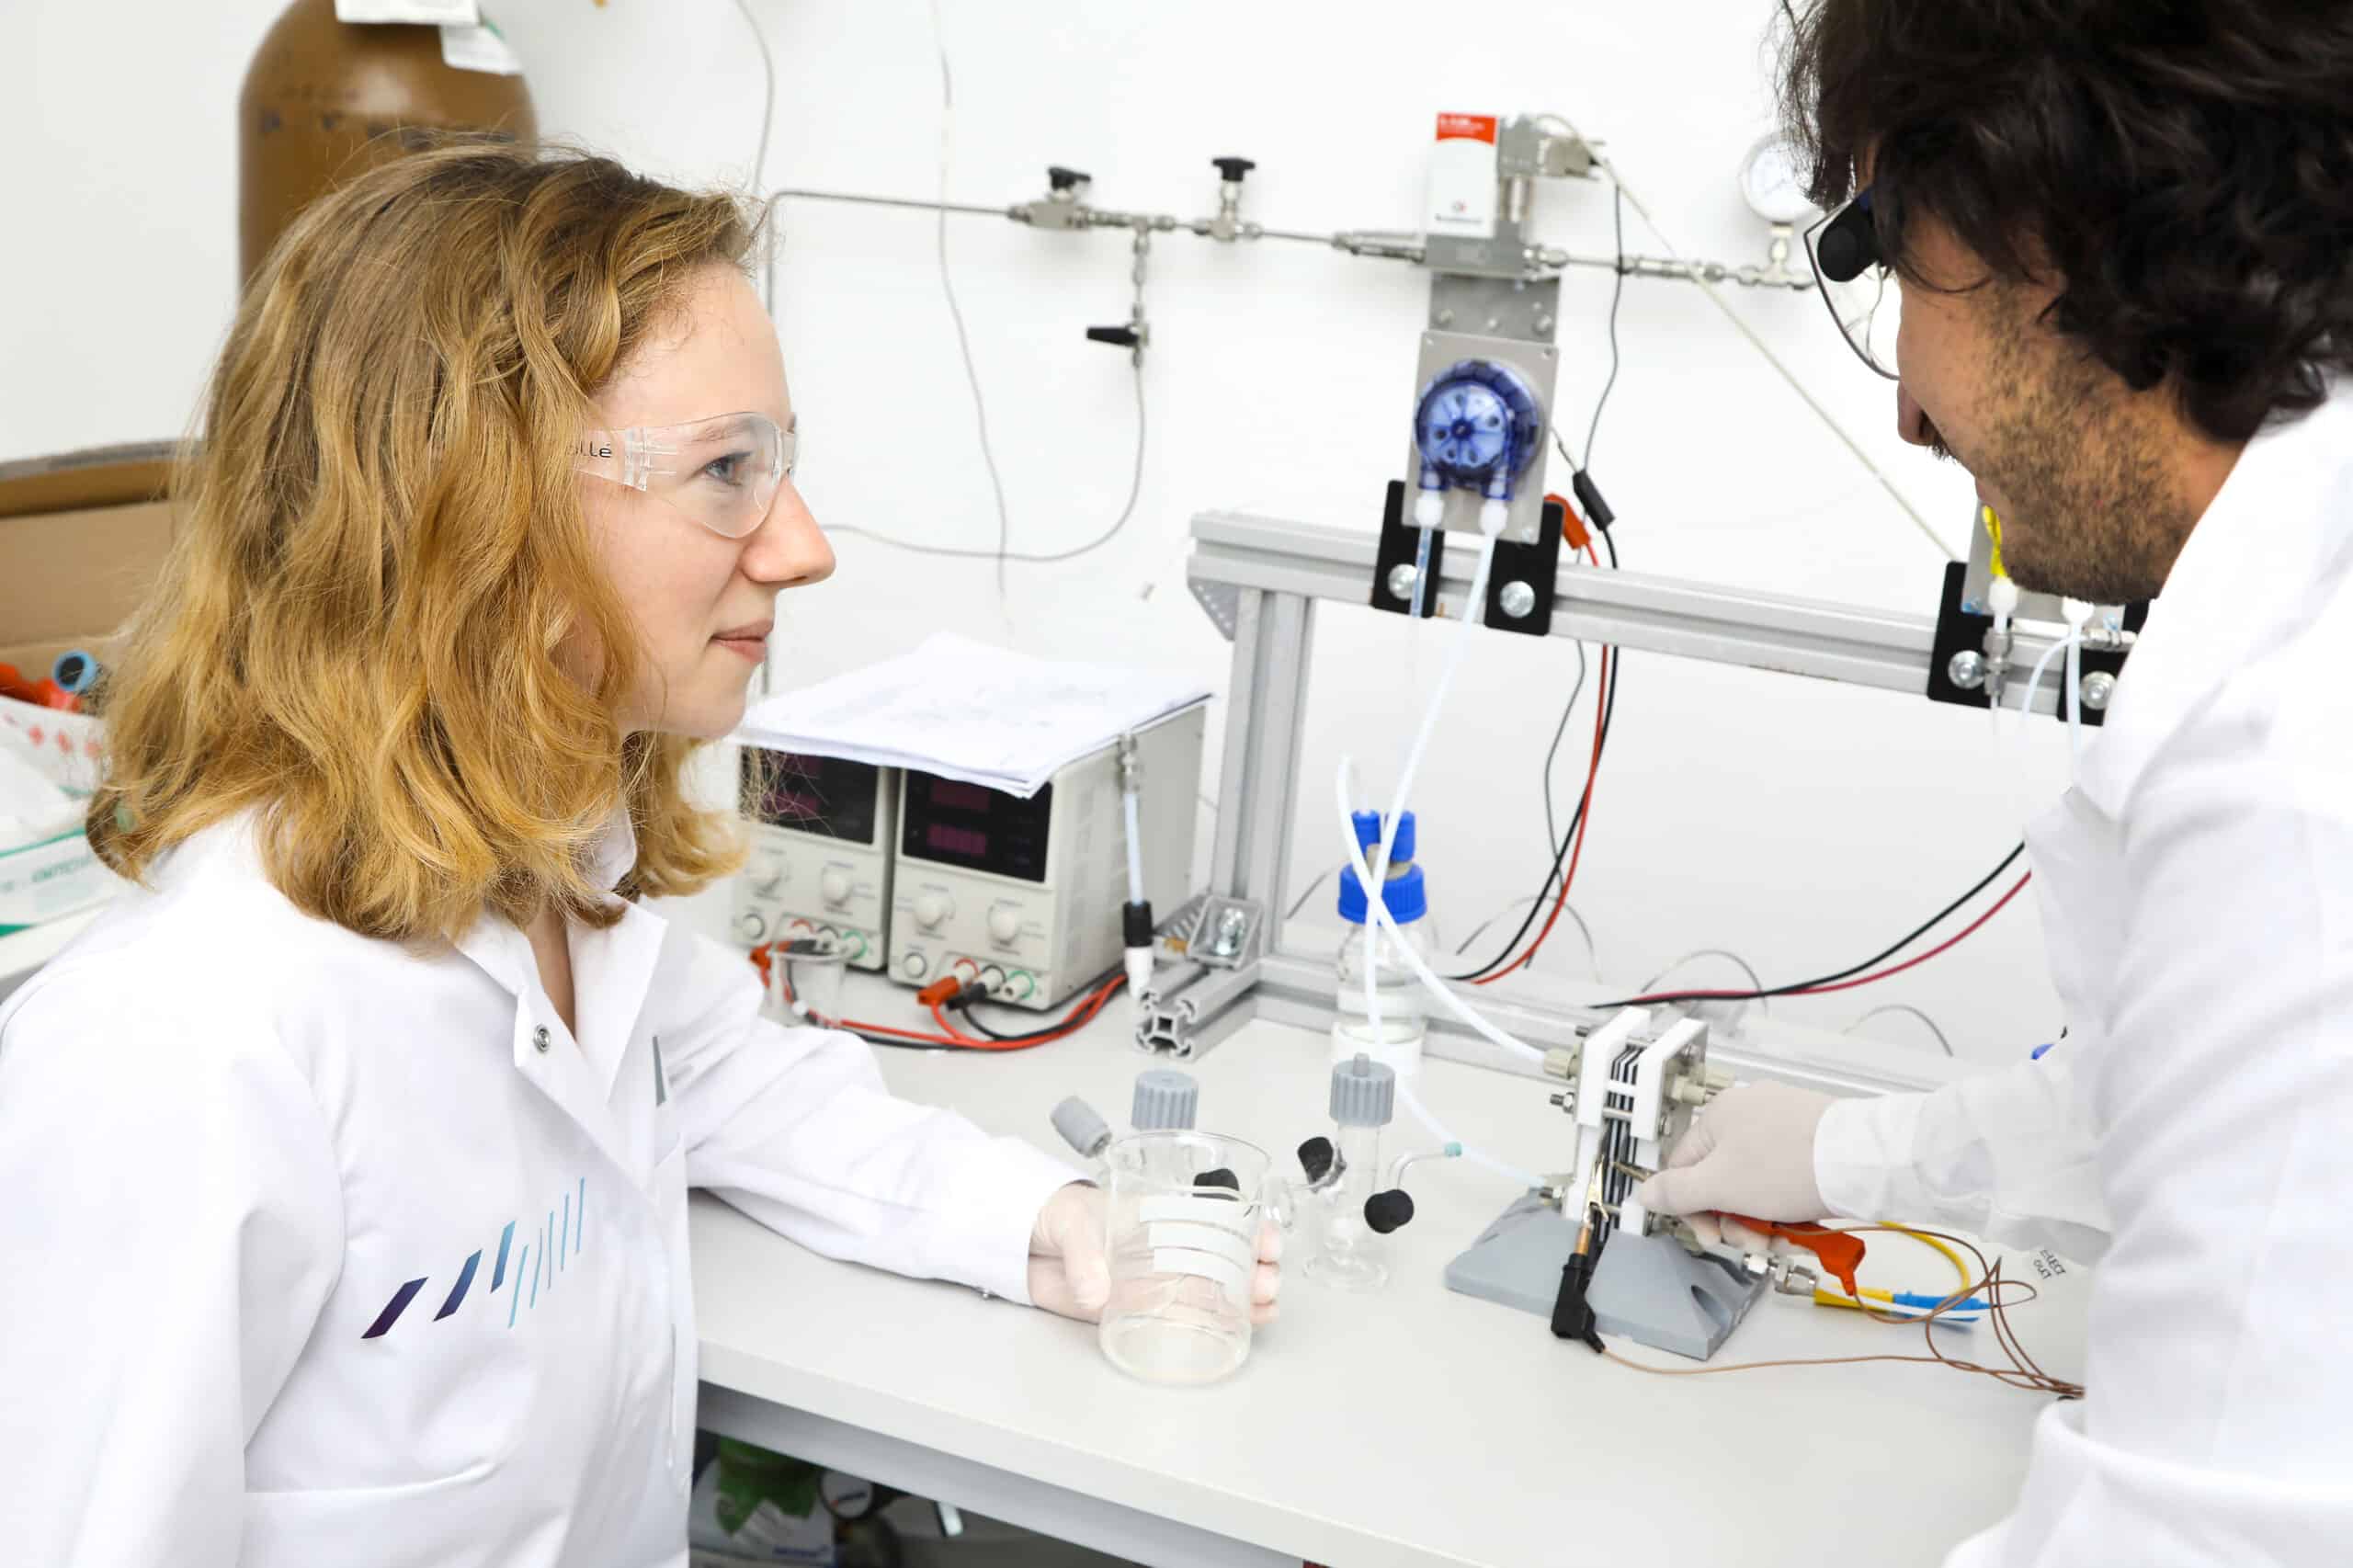 Austria launches new PhD program to fast-track production of green hydrogen